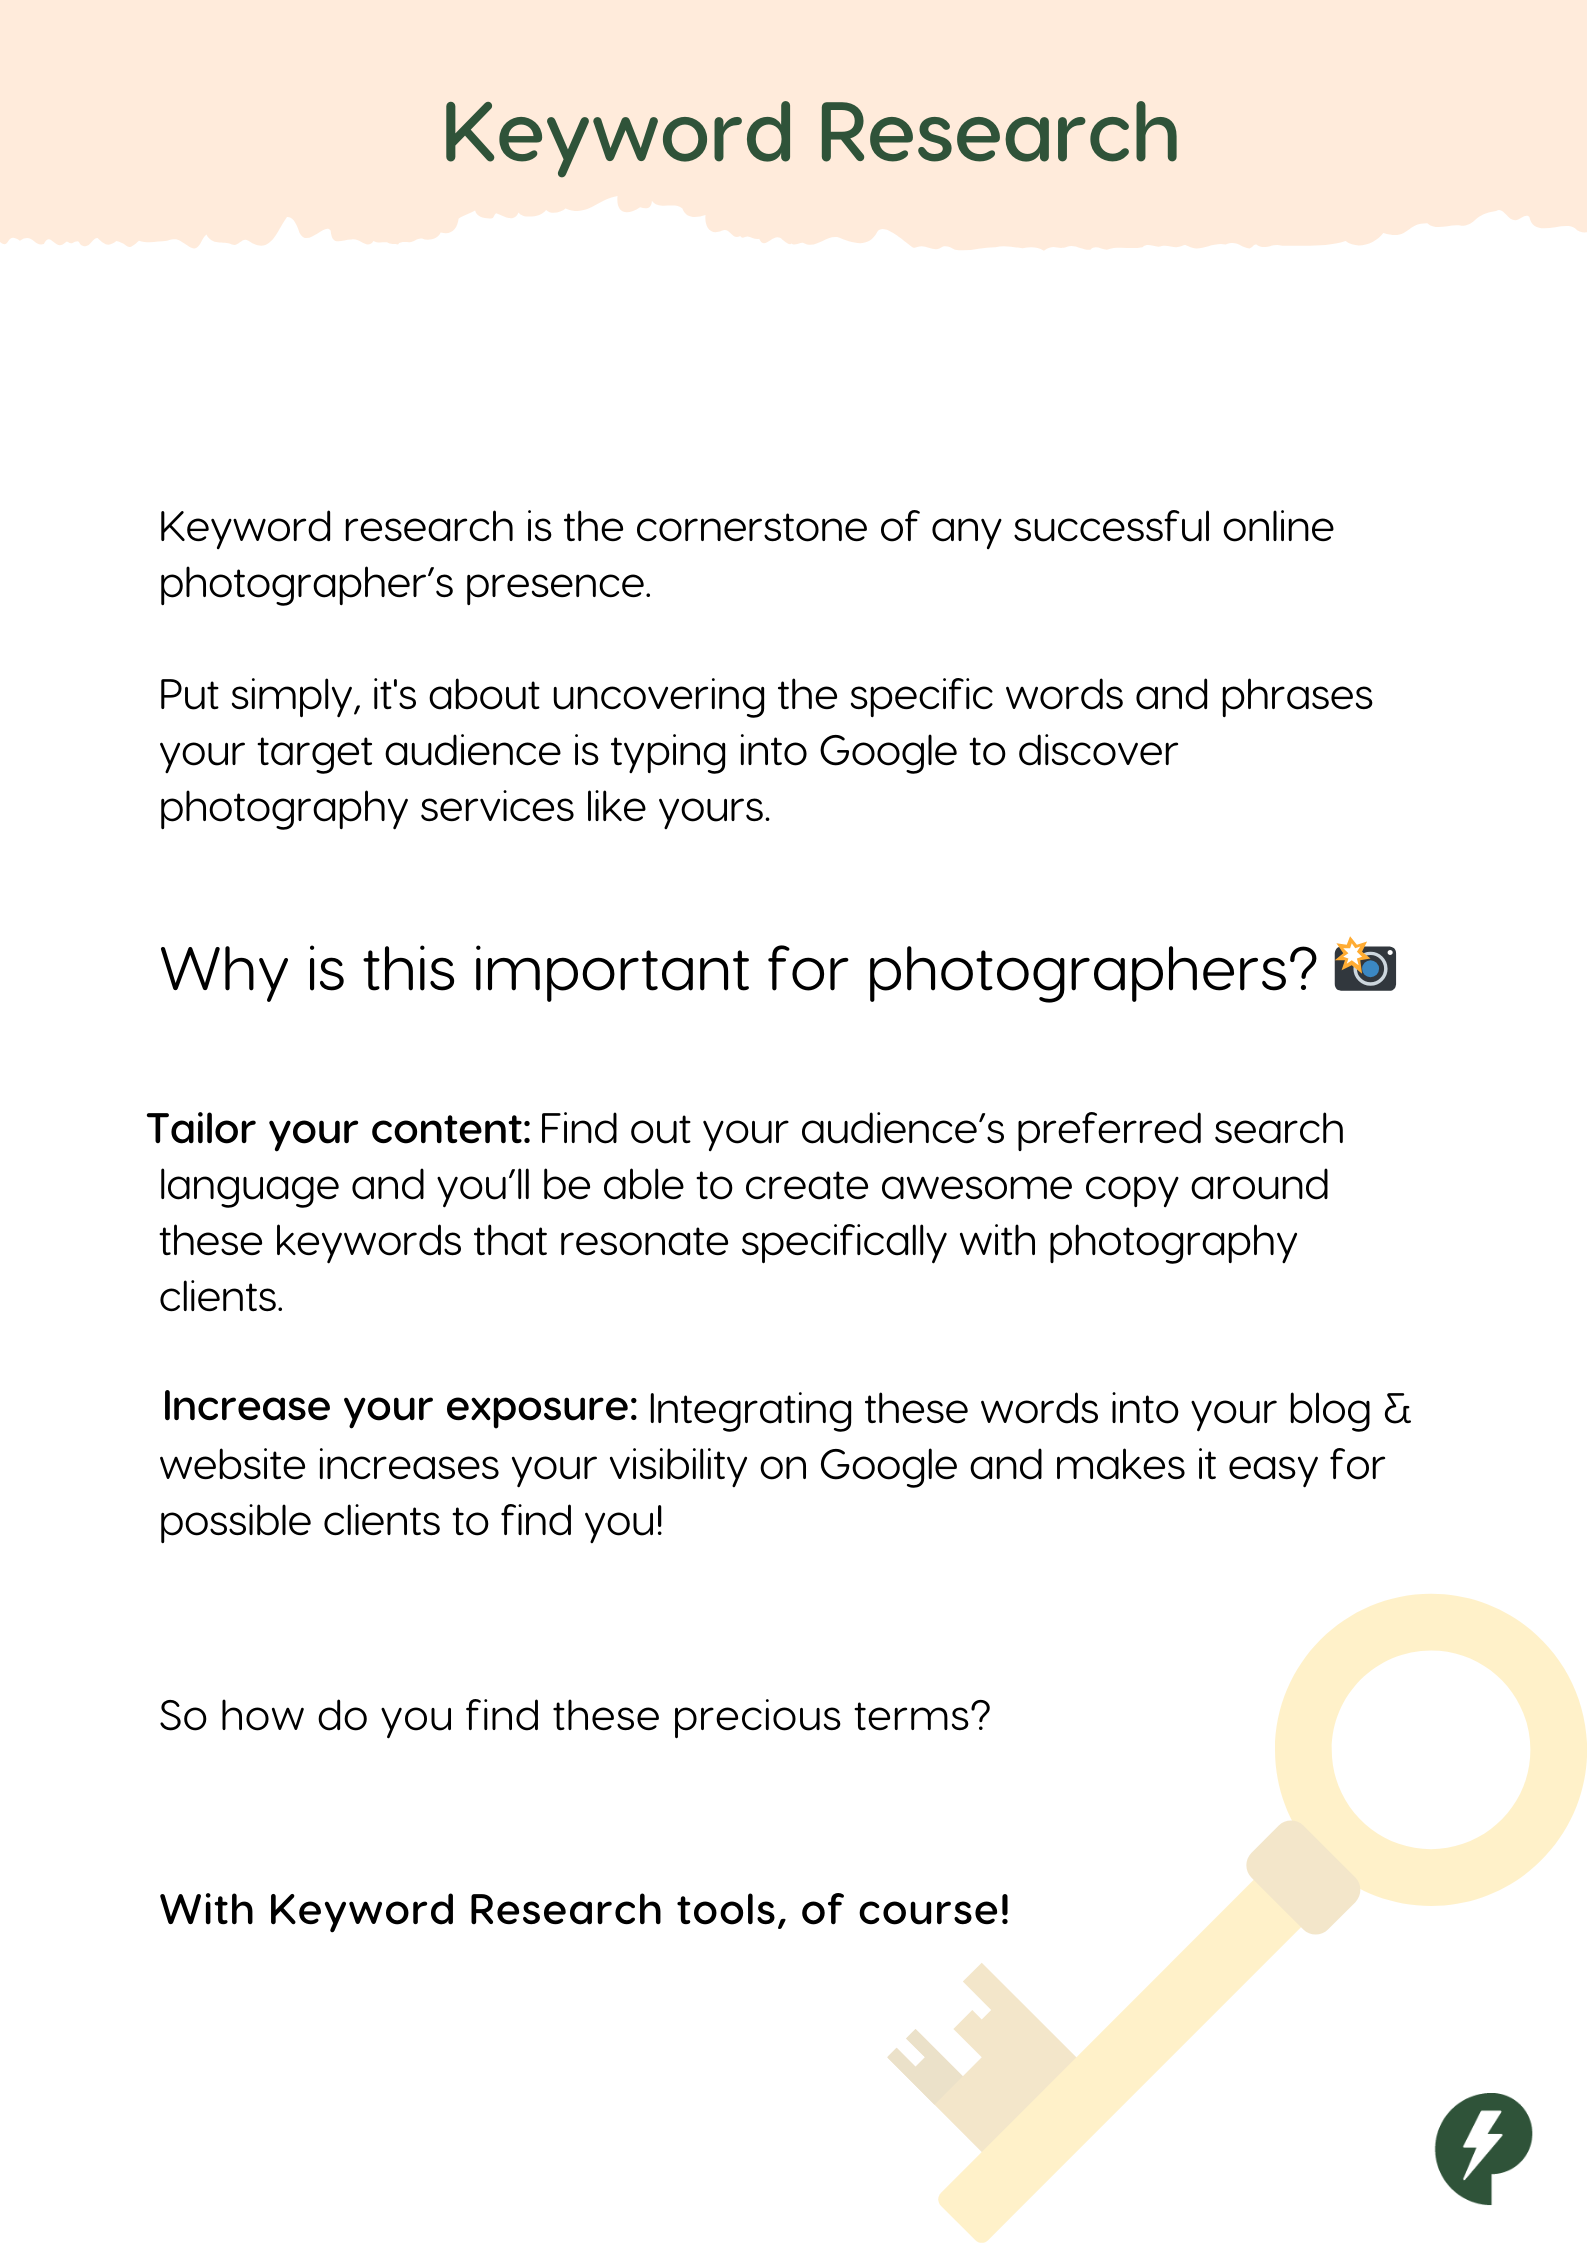 Keyword Research - SEO for Photographers